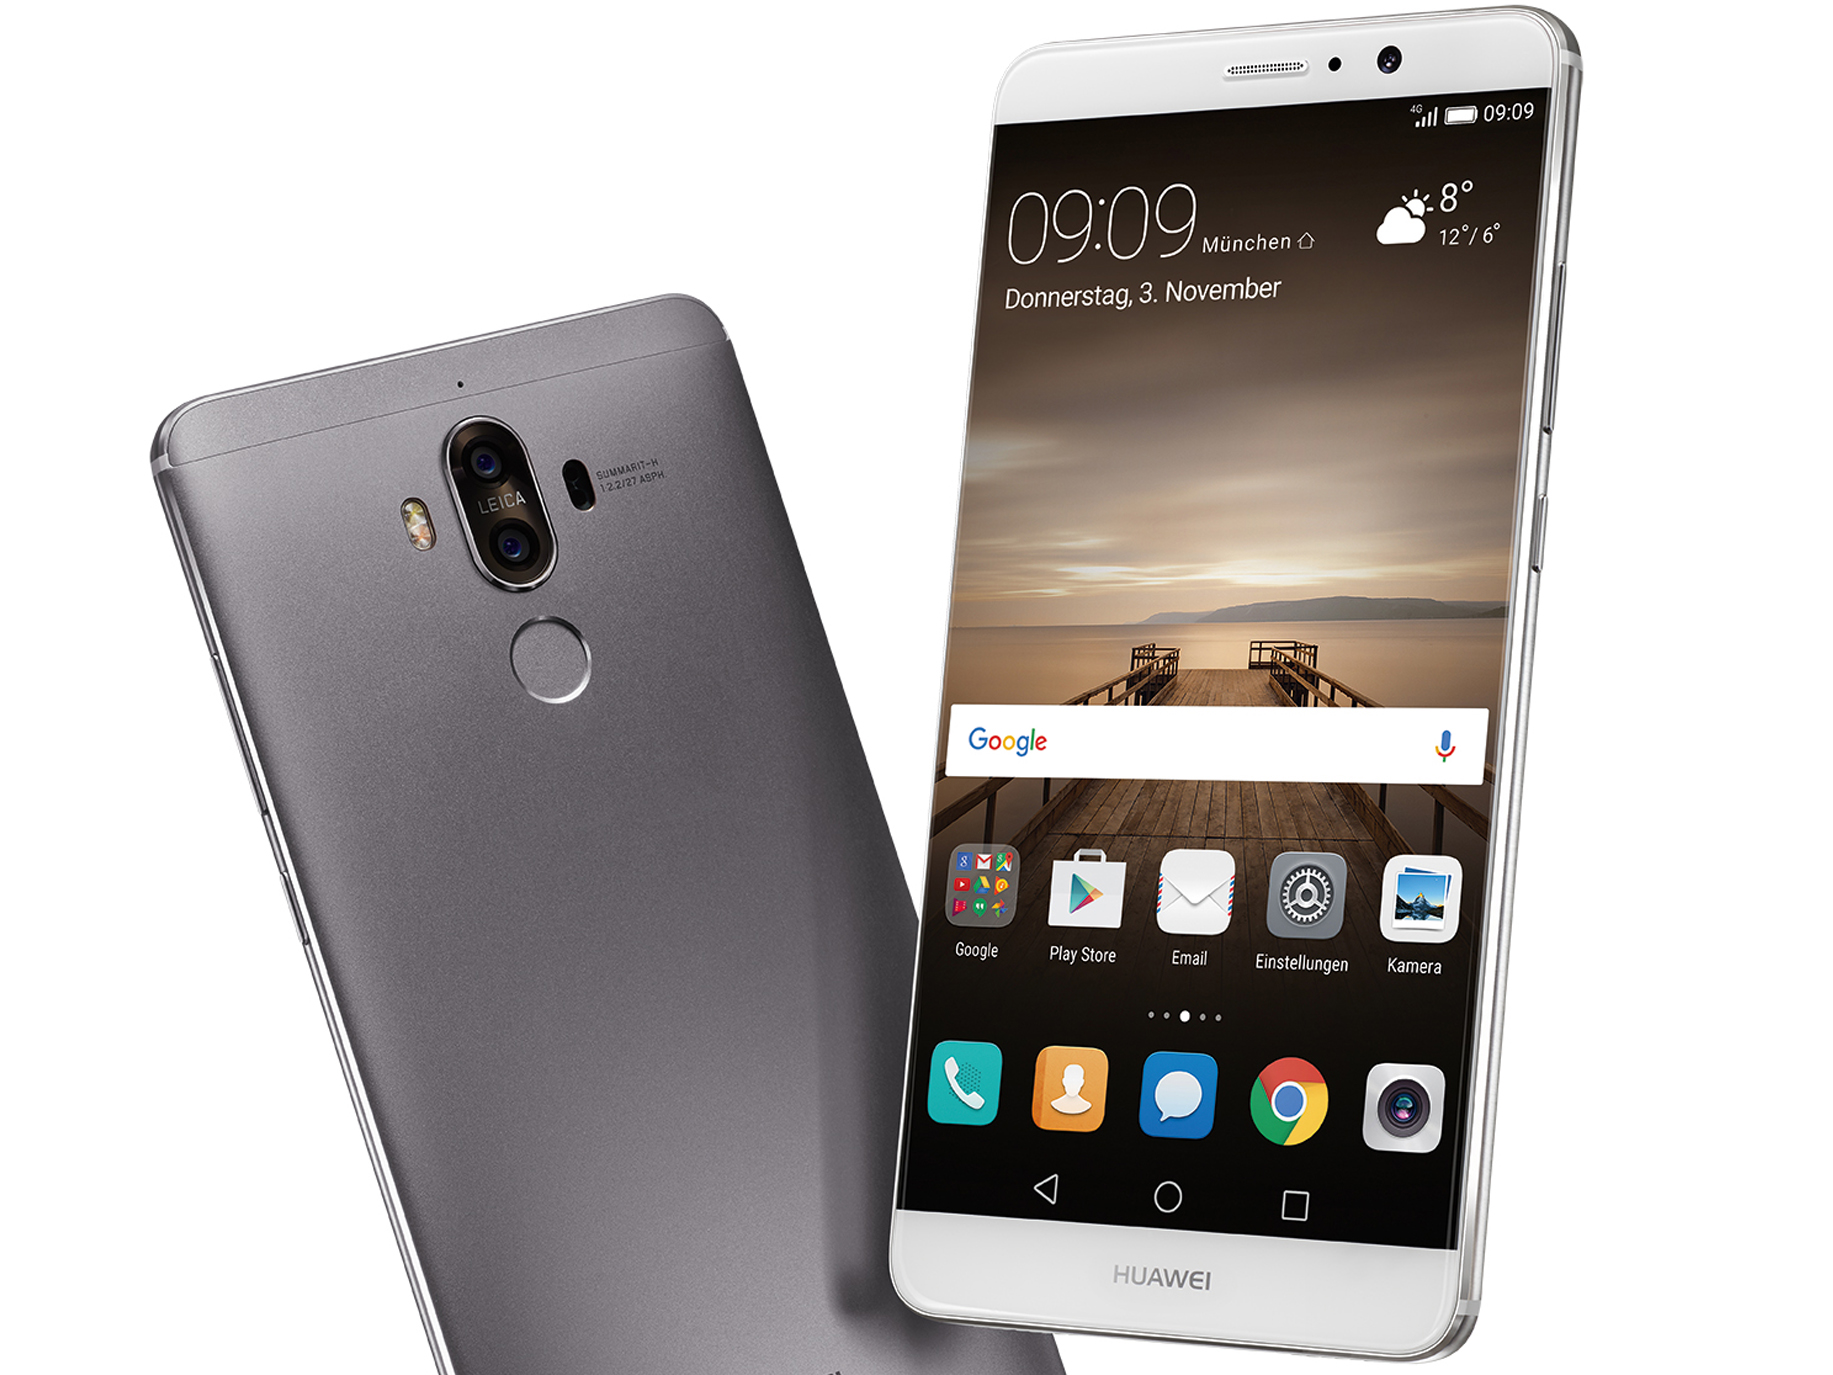 Distilleren Sinis Encyclopedie Huawei gives fans hope that the Mate 9 and Mate 9 Pro will receive EMUI 10  and Android 10 - NotebookCheck.net News